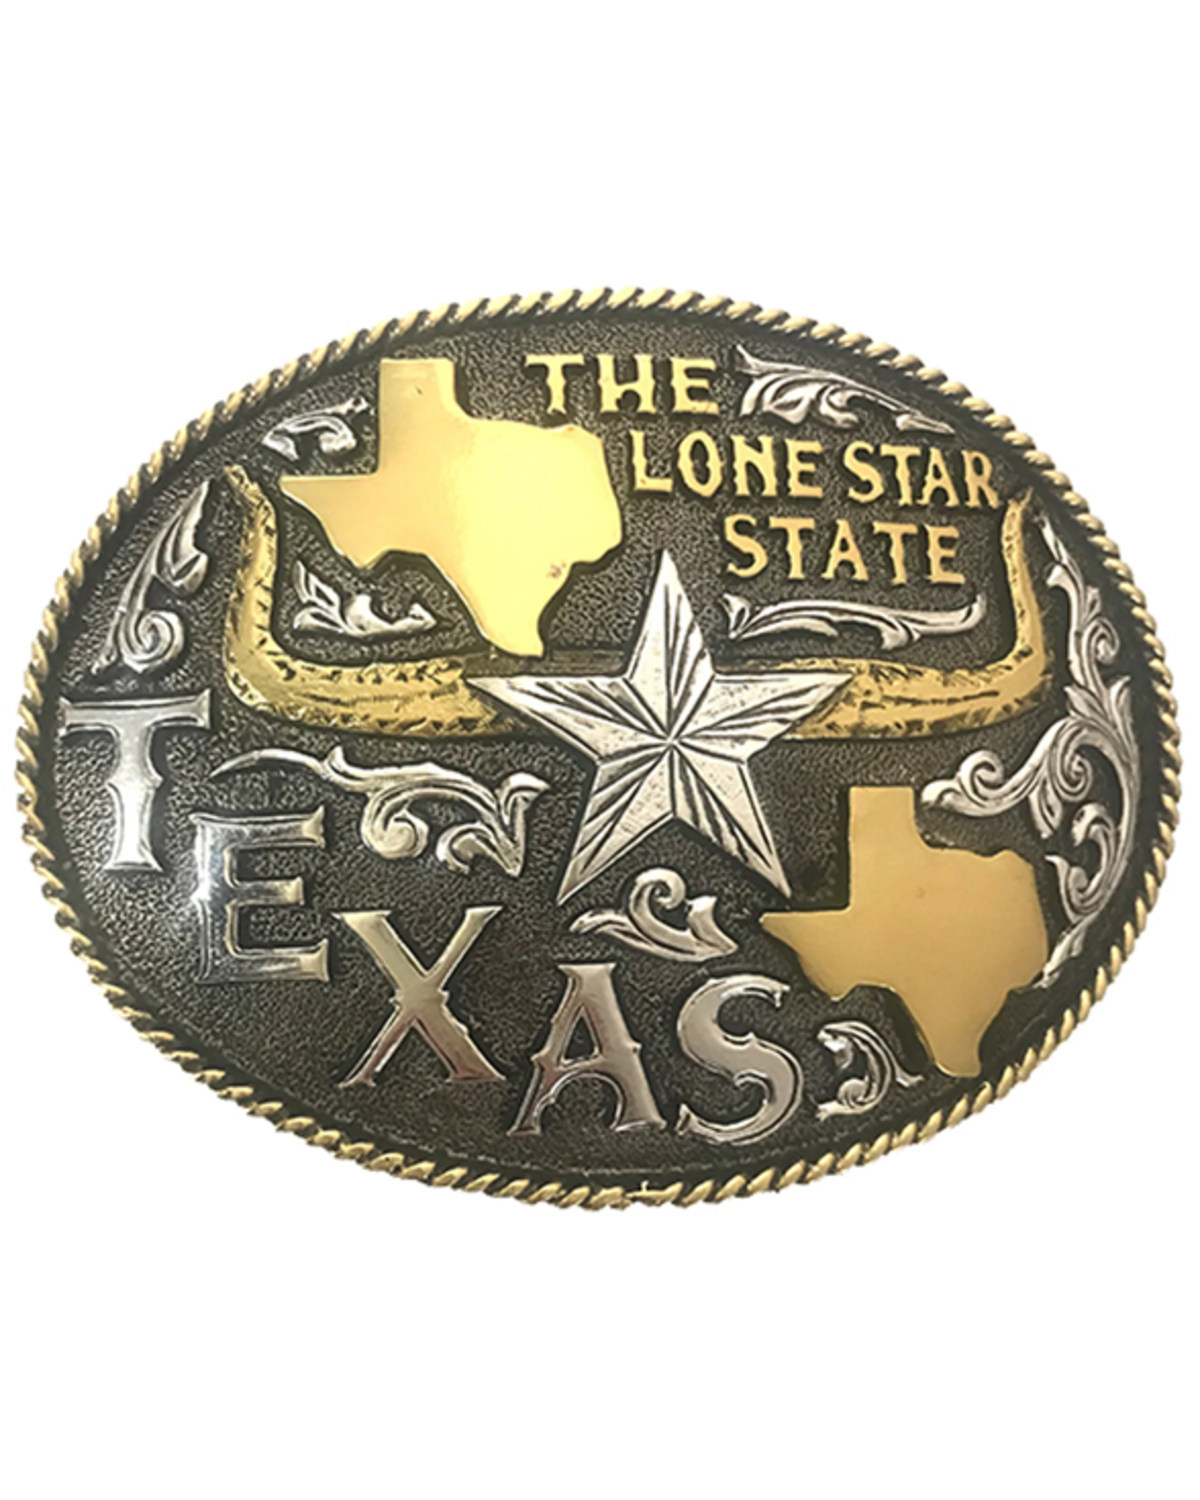 AndWest Men's Antique Gold & Silver The Long Star State Texas Belt Buckle